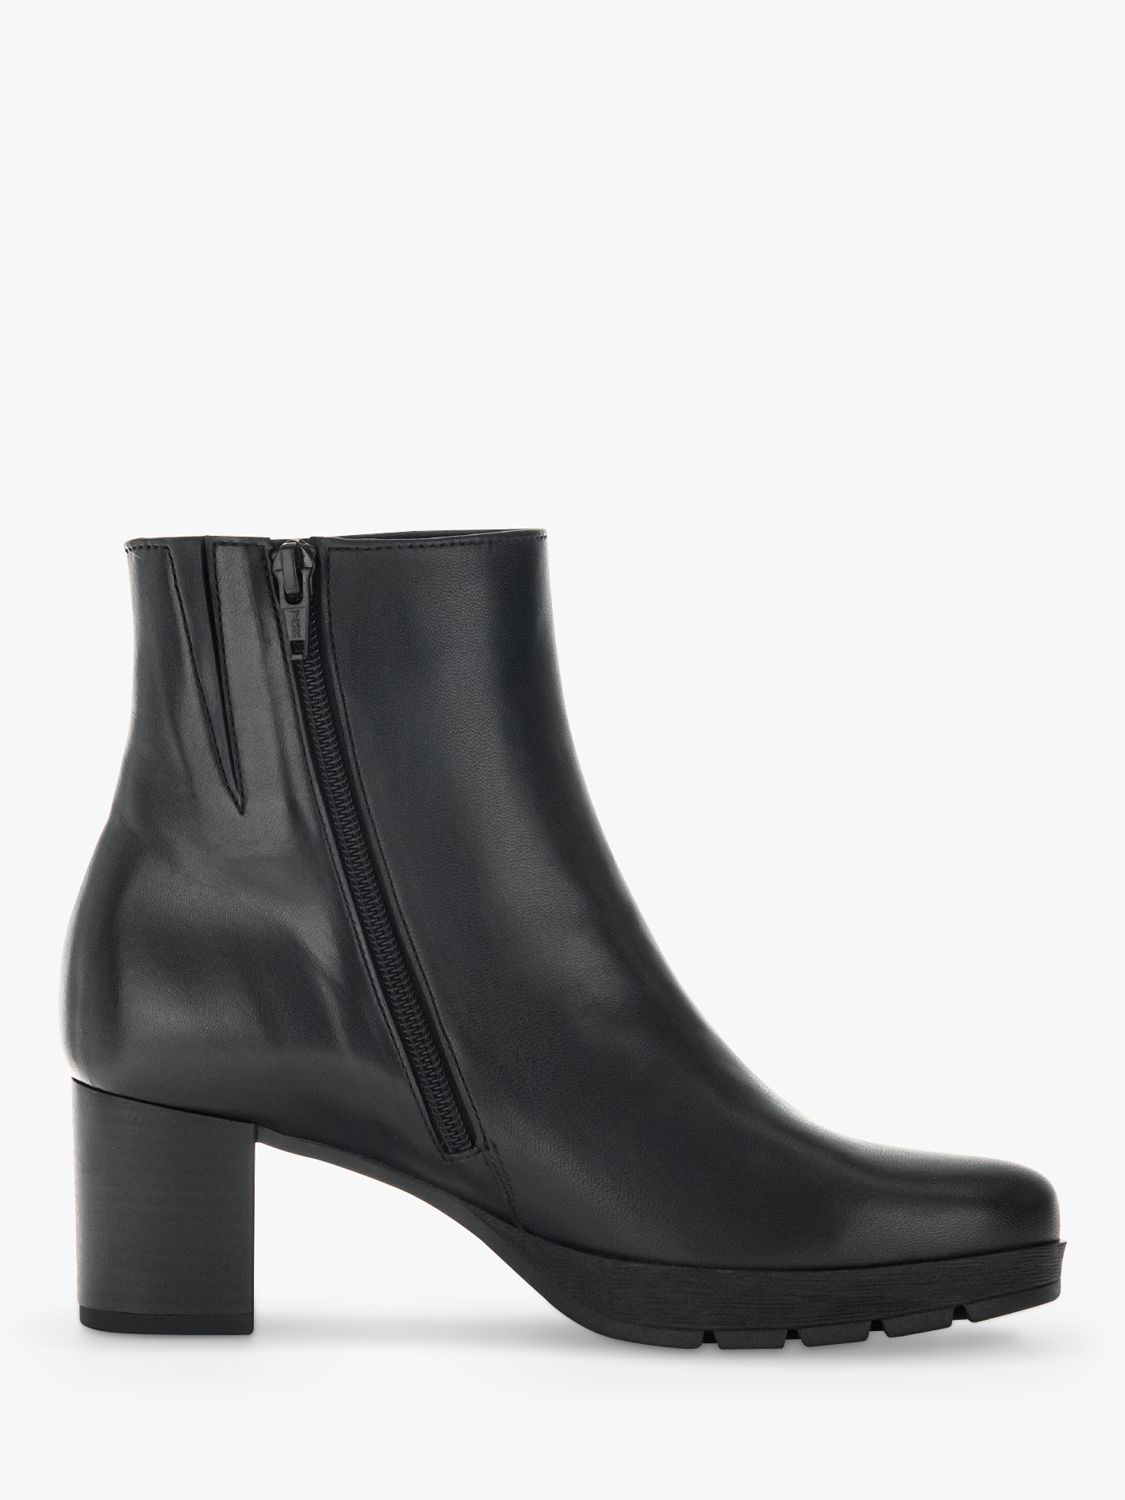 Gabor Essential Wide Fit Leather Ankle Boots, Black at John Lewis Partners